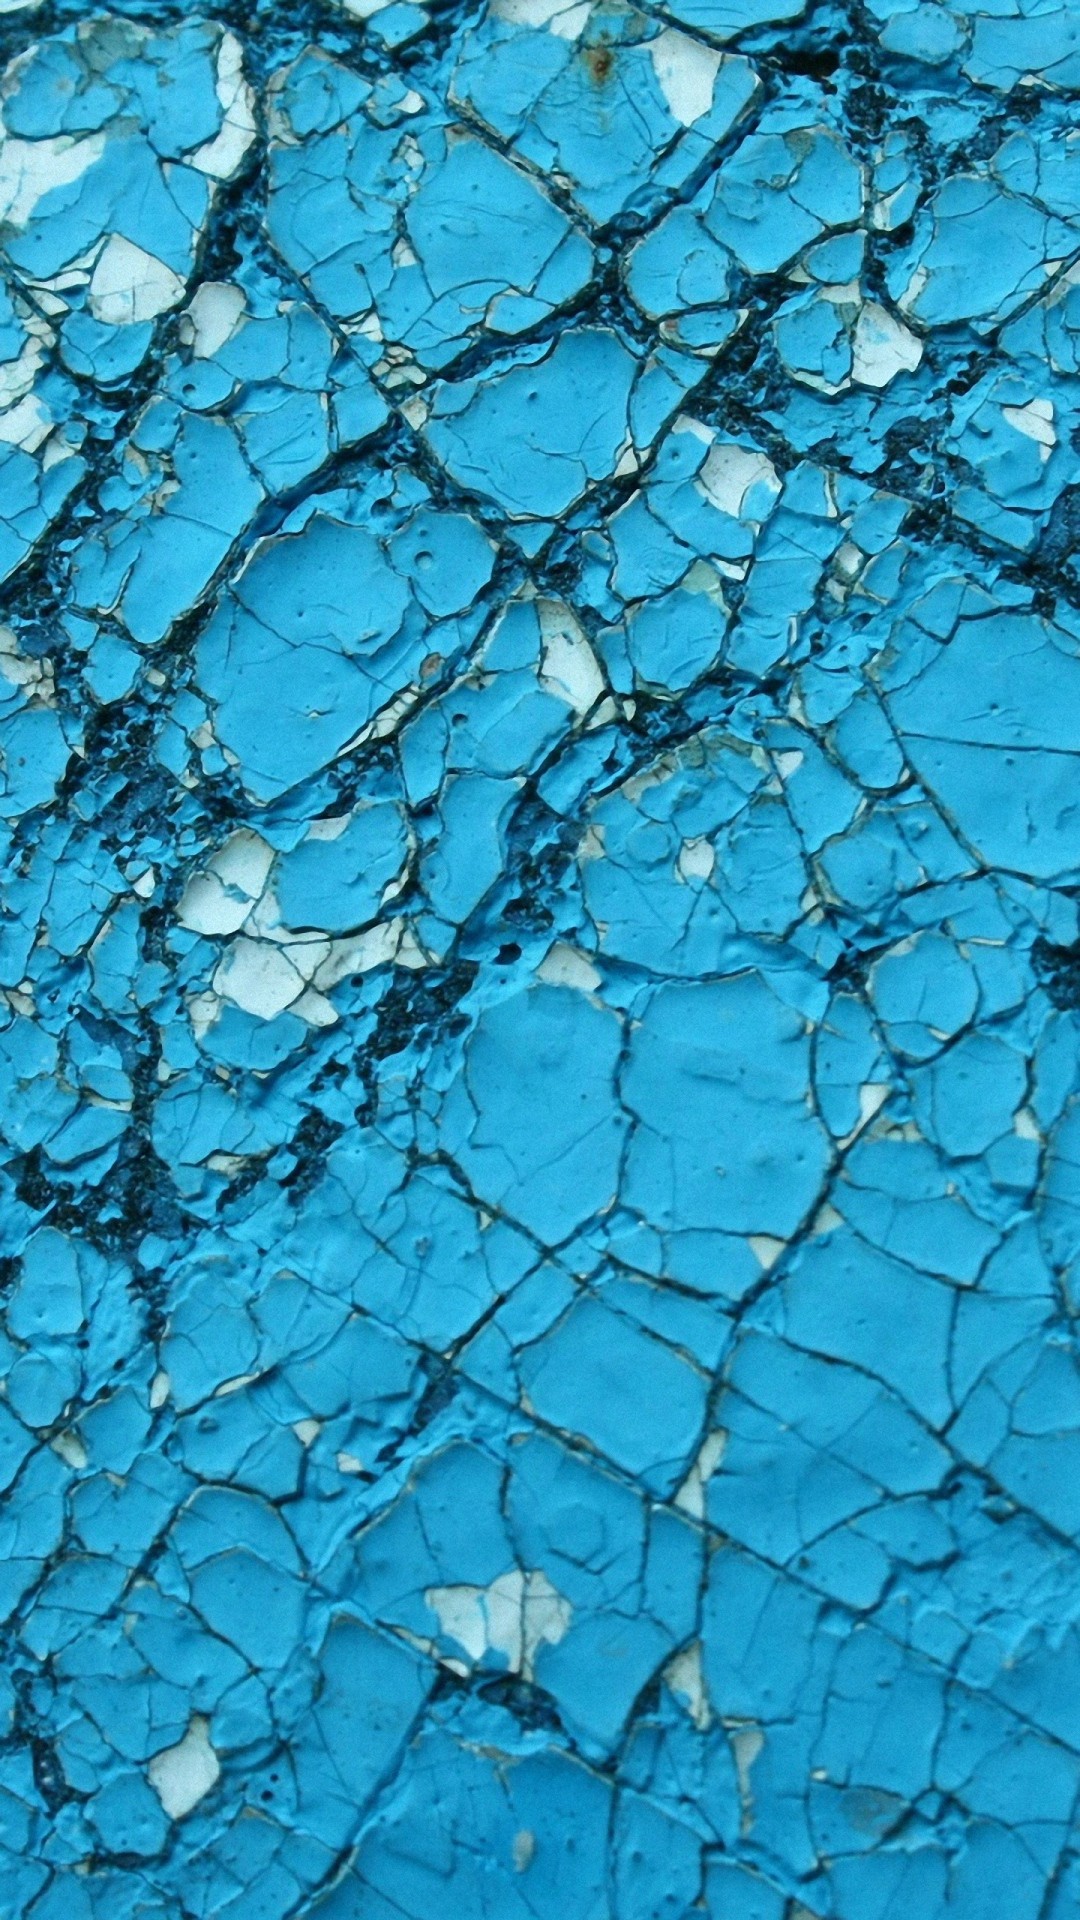 Cracked Screen Wallpaper for Android Free Download